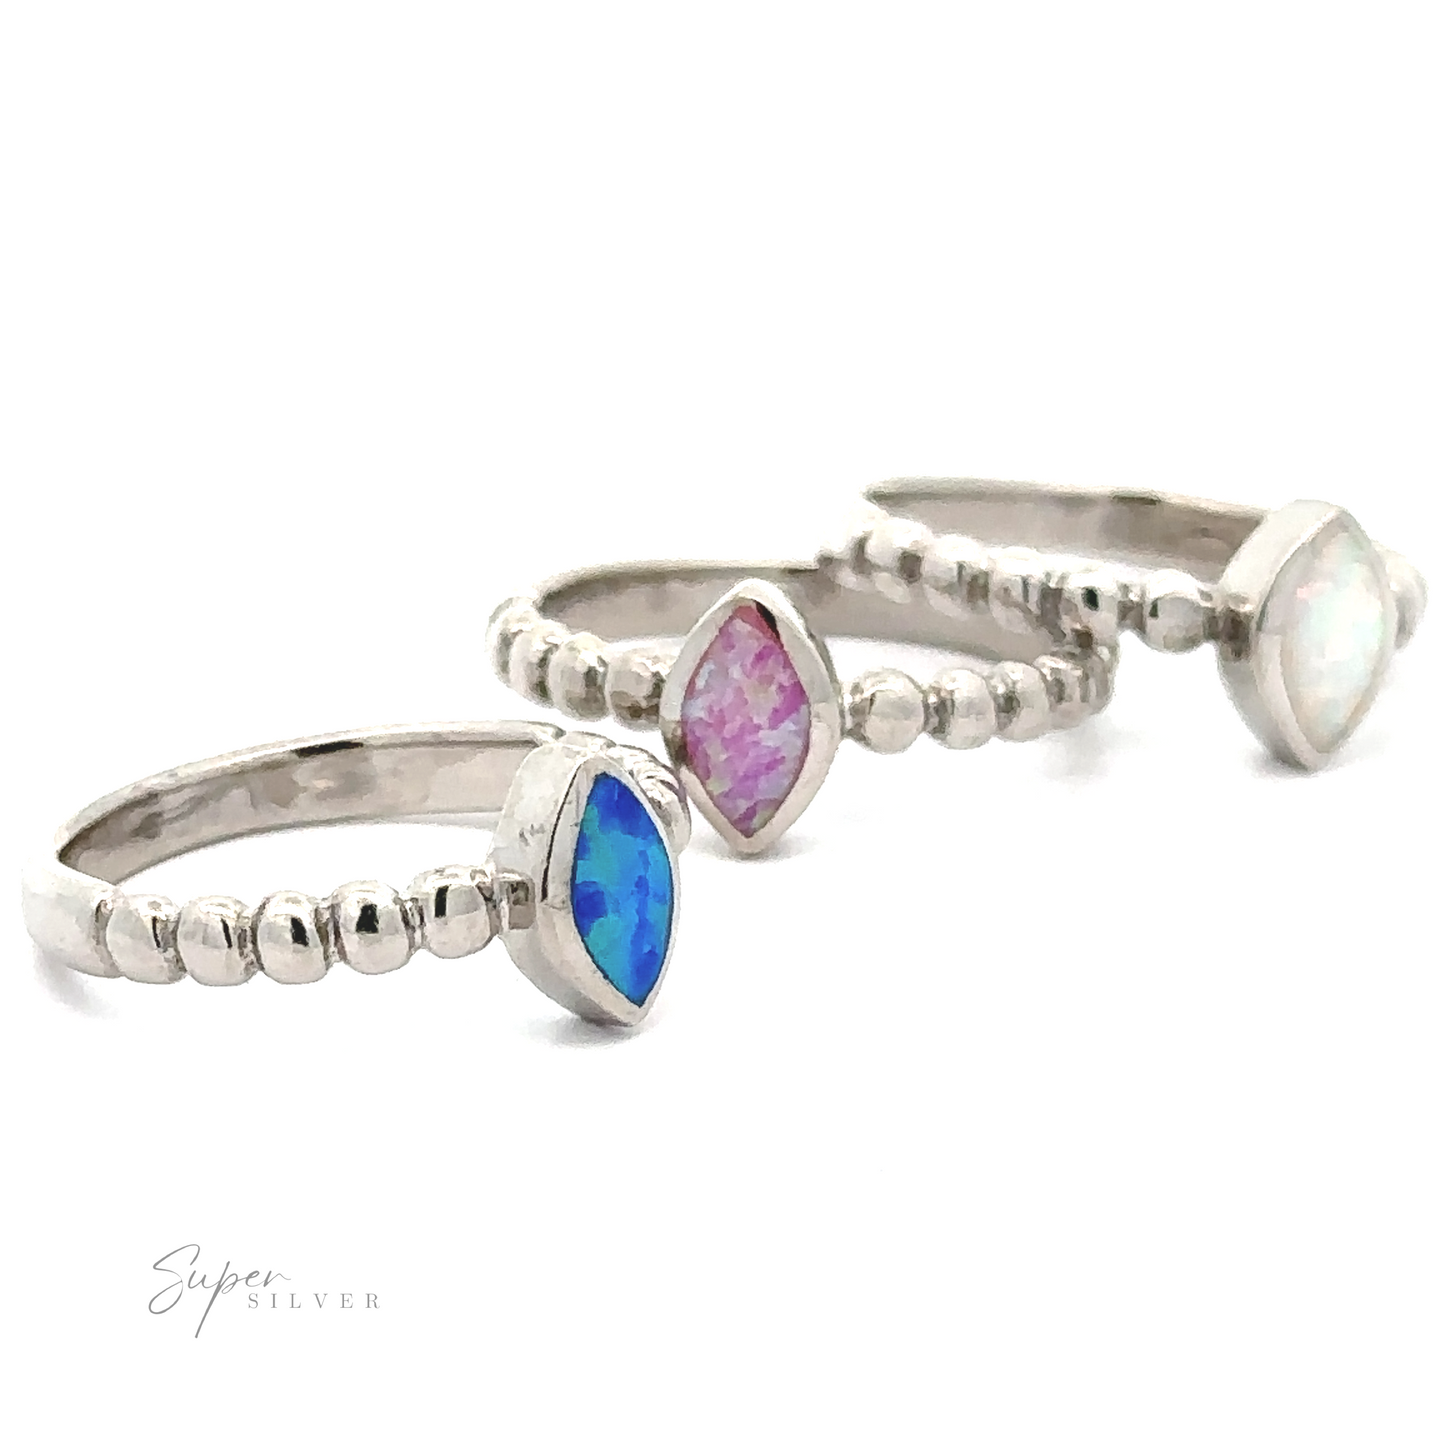 Three Marquise Lab-Created Opal Rings with Beaded Design, each featuring a marquise-shaped, lab-created opal in different hues of blue, pink, and white.